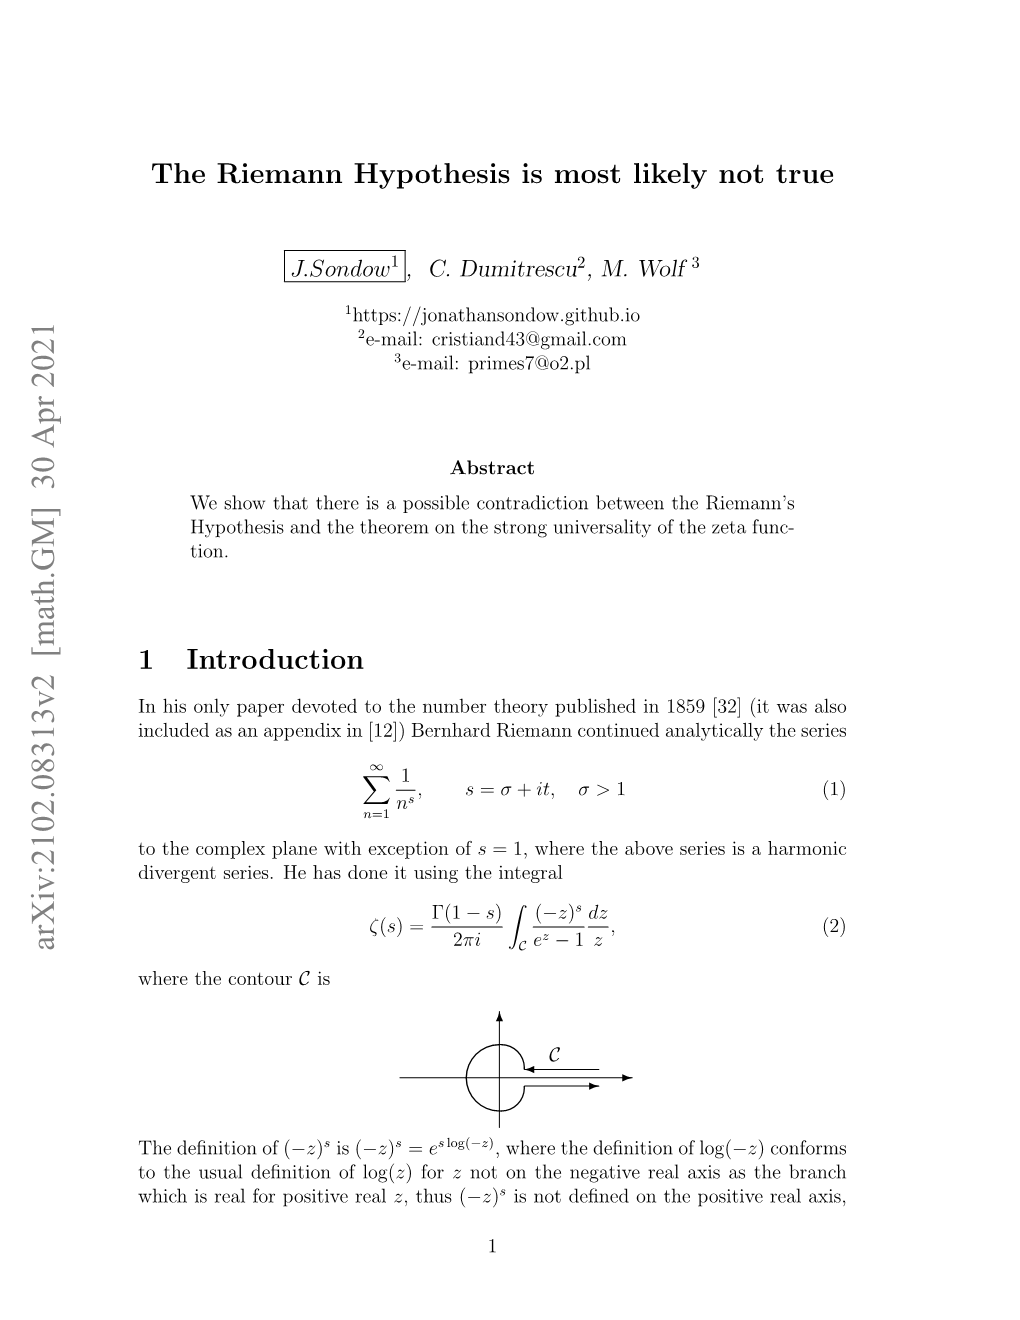 The Riemann Hypothesis Is Most Likely Not True